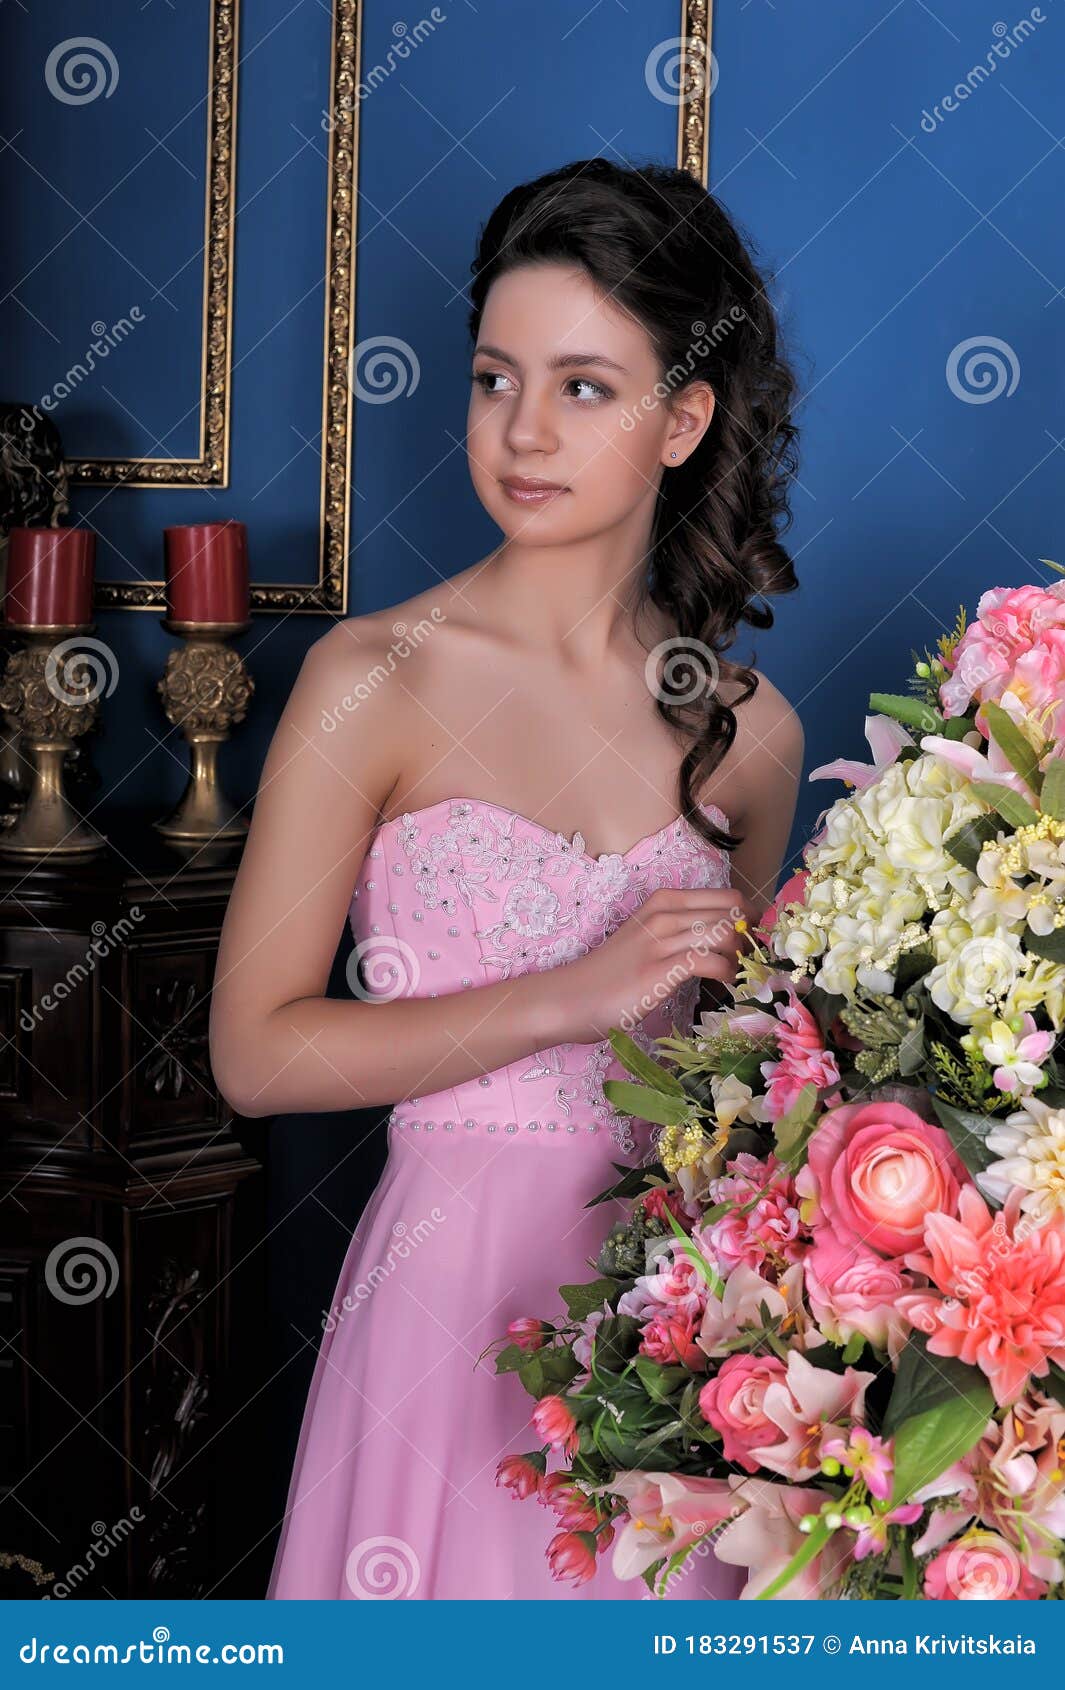 Brunette Girl In A Pink Elegant Dress Among The Flowers In The Room Stock Image Image Of 